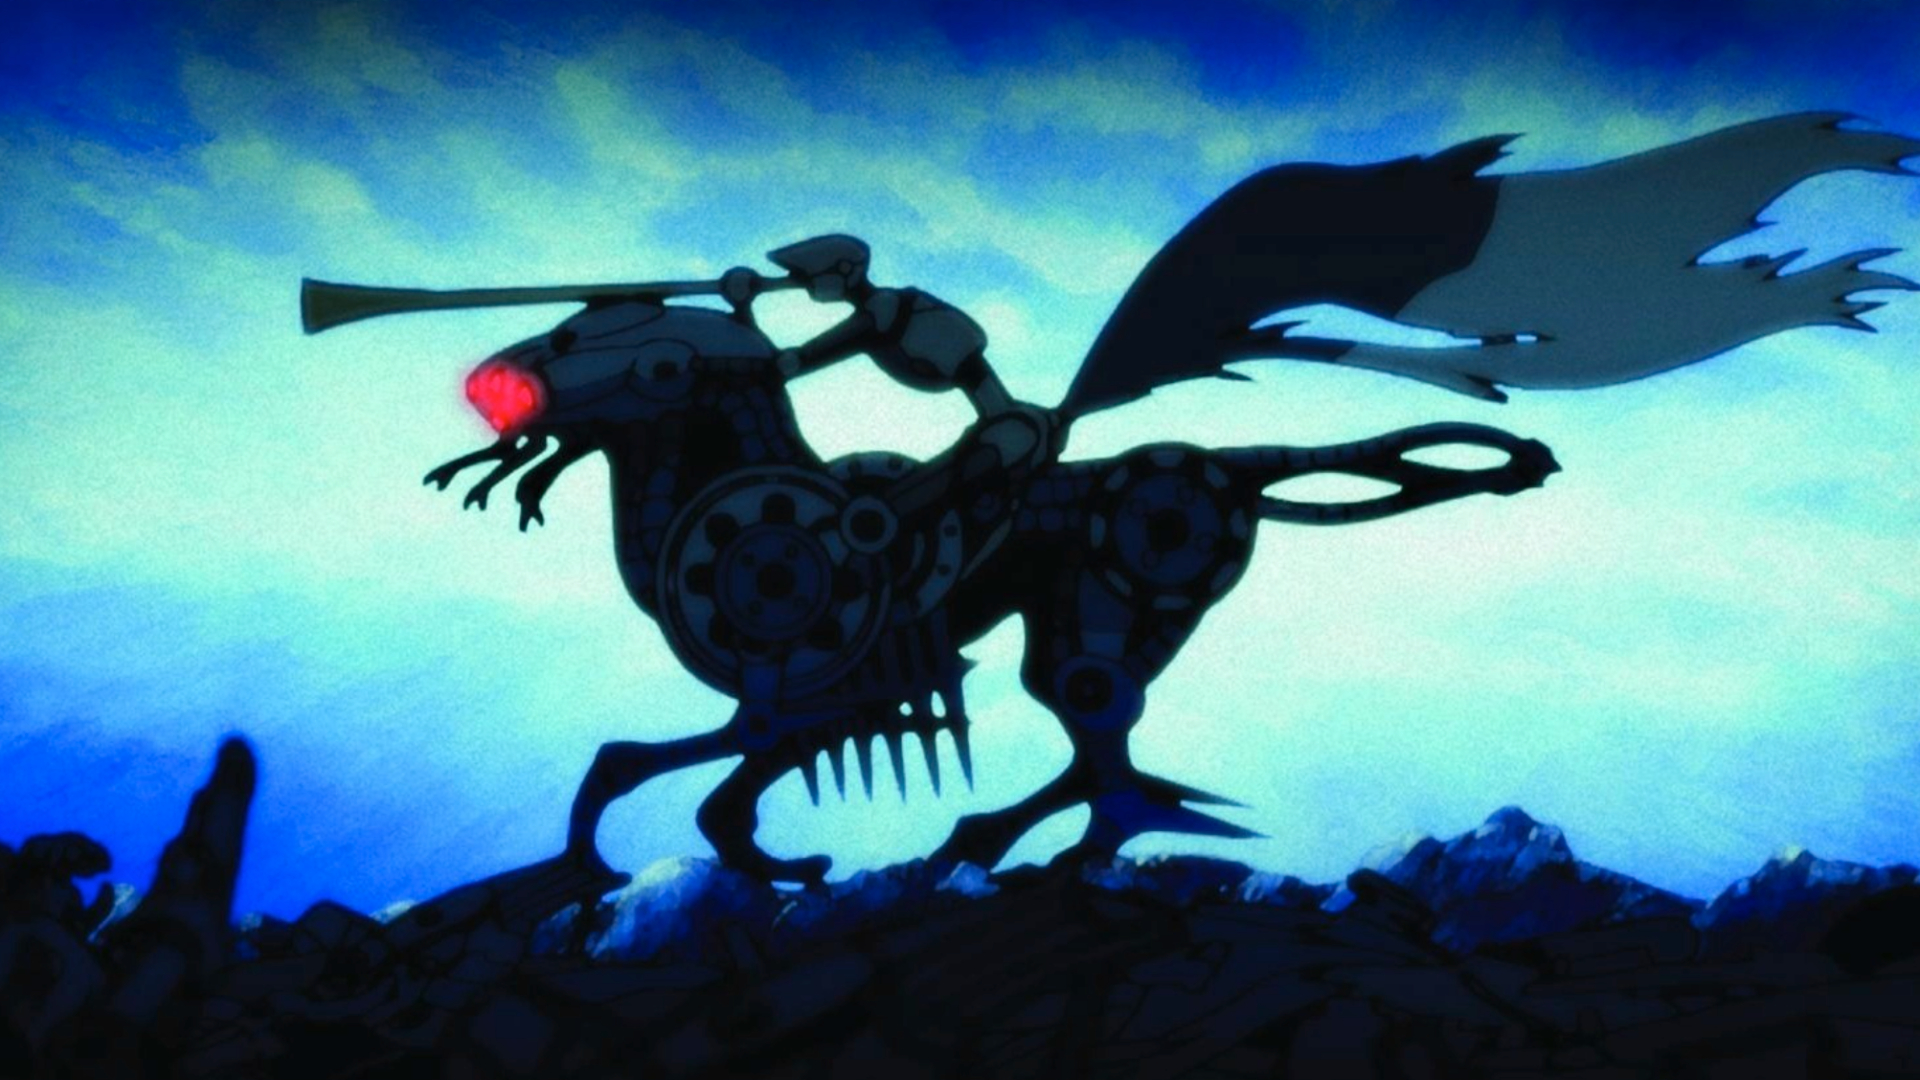 A still one of the nine animated short films from The Animatrix series.  A robot is blowing on a trumpet whilst riding a mechnical horse-looking creature, with a tatted red and white flag billowing out behind them.